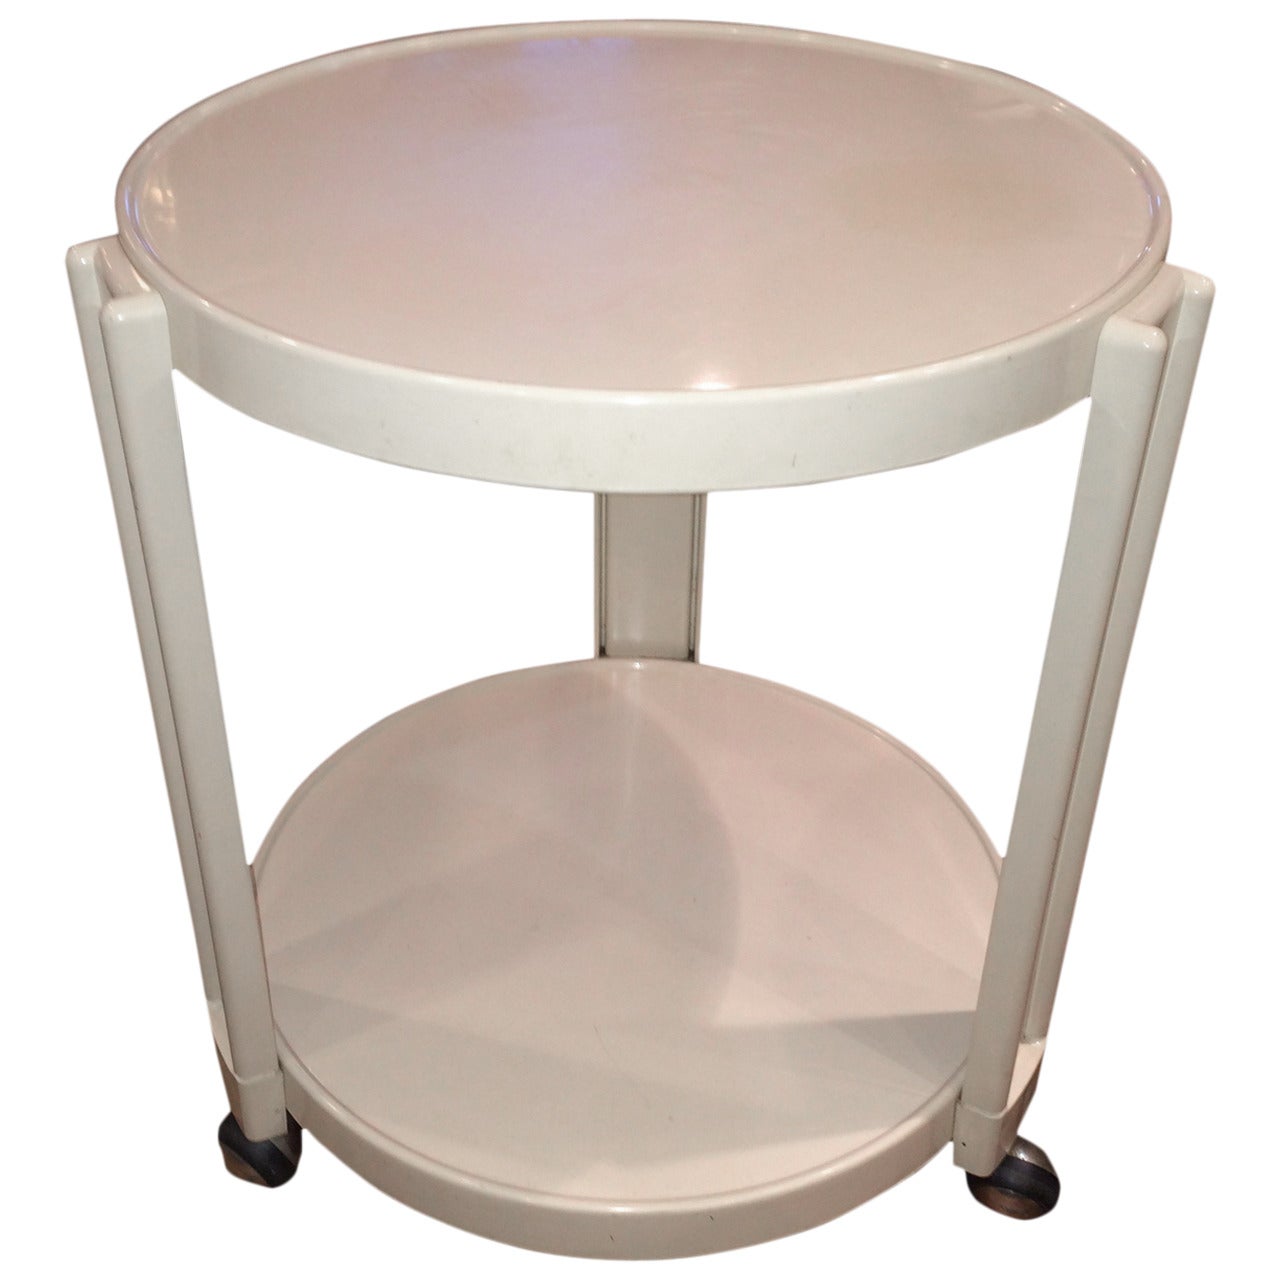 Giotto Stoppino for Kartell  round bar cart/table on wheels